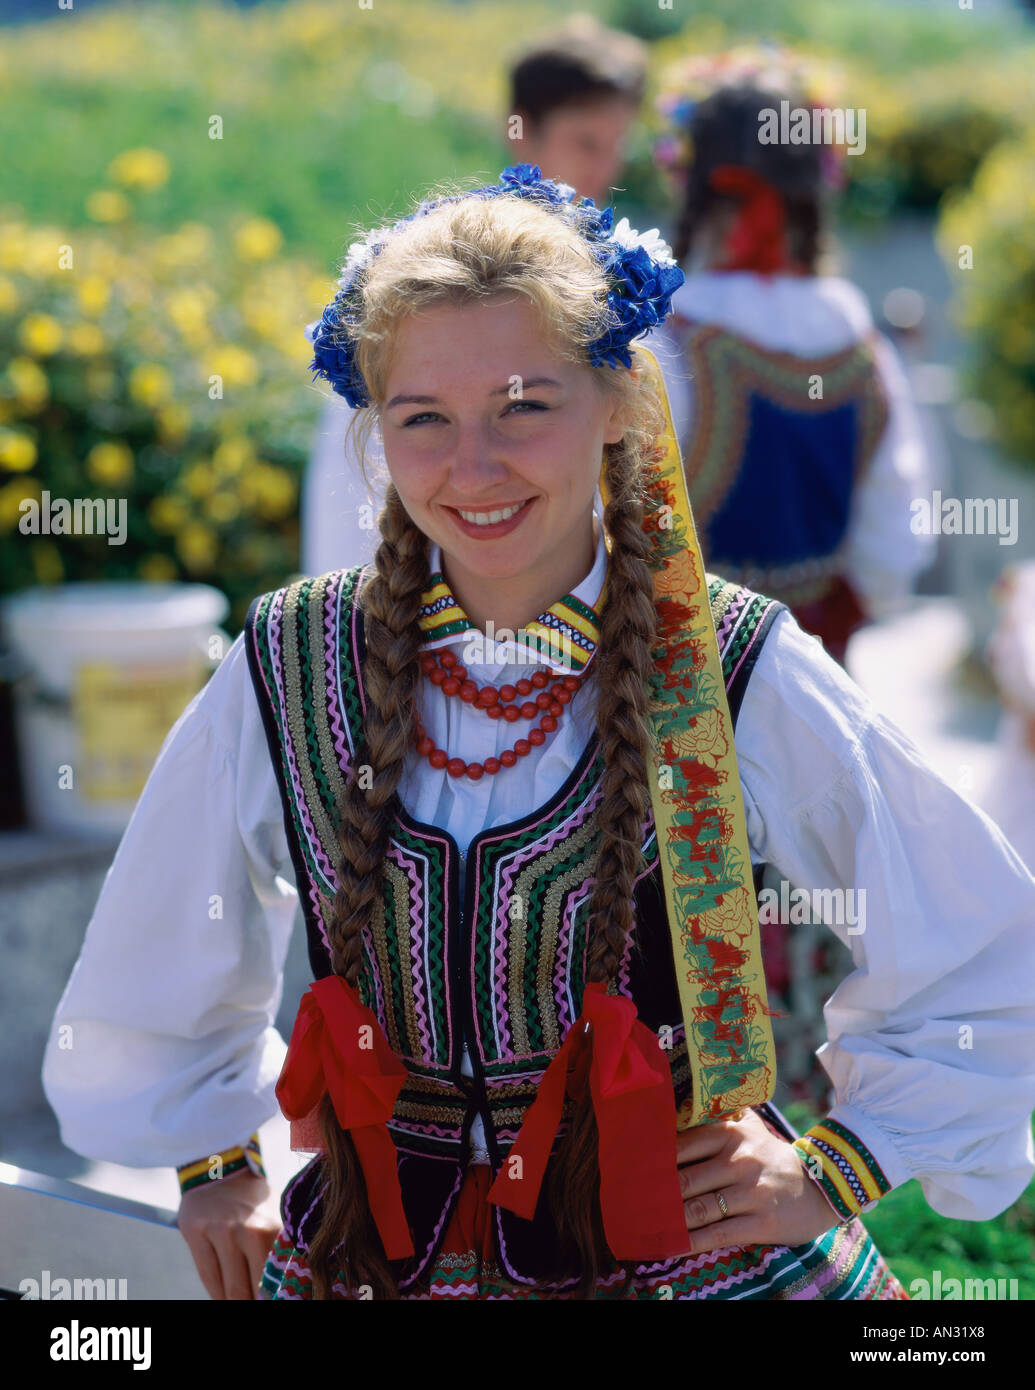 Girl Dressed in Traditional Polish Costume, Warsaw, Poland Stock Photo ...